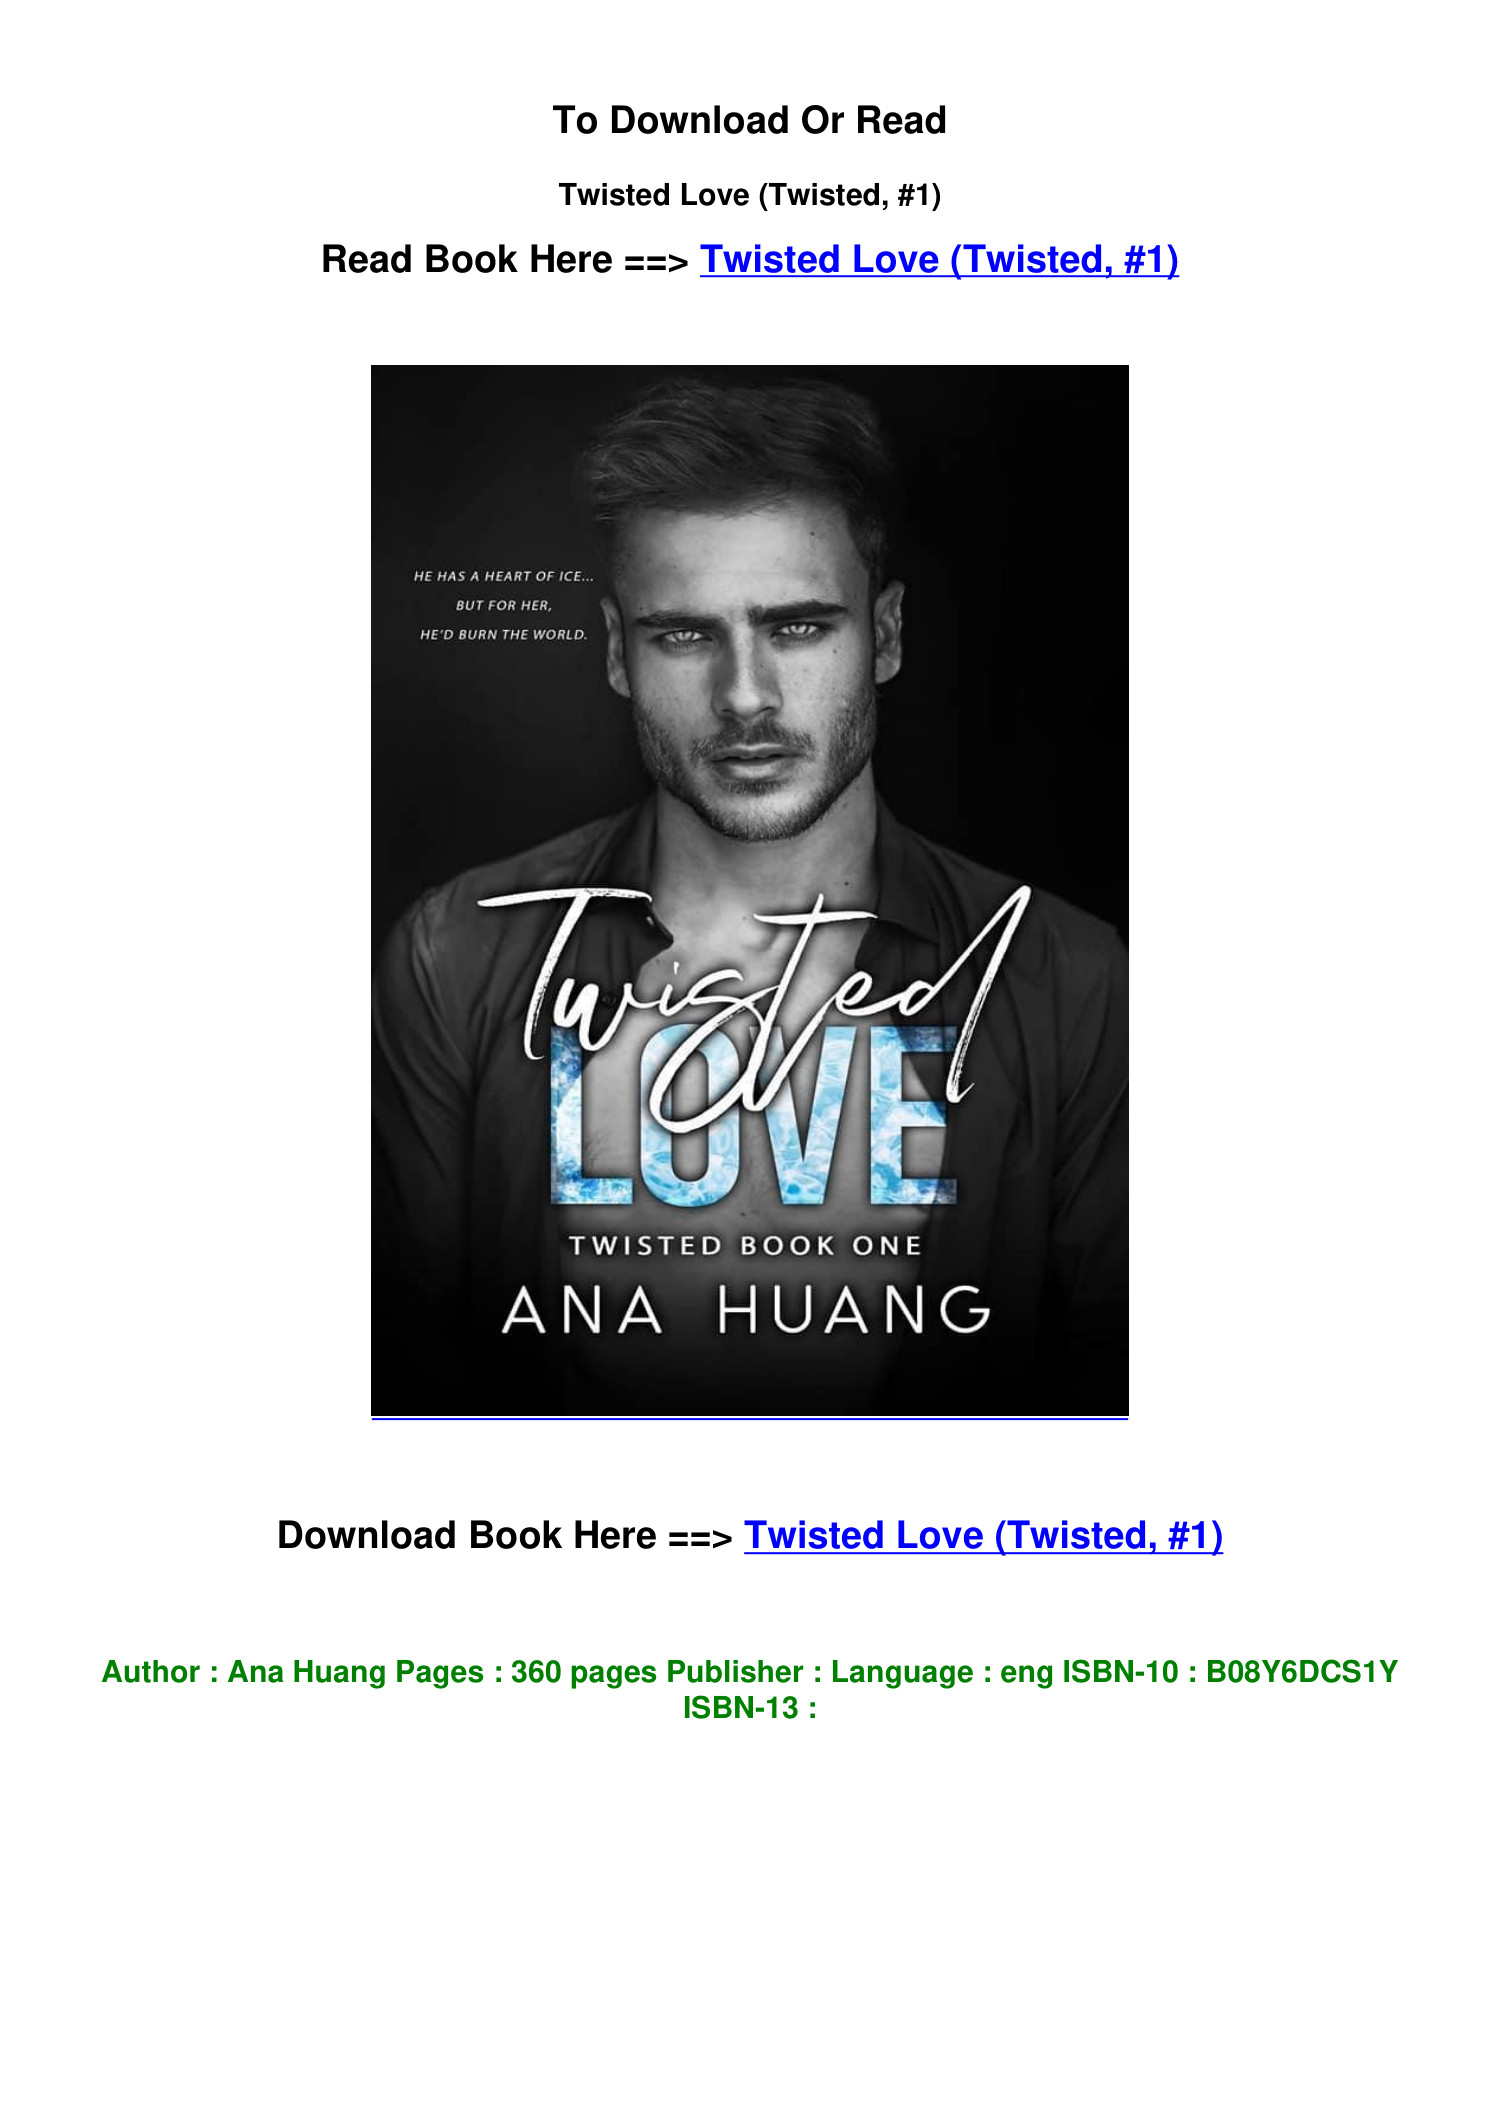 Download] Twisted Love (Twisted #1) - Ana Huang by stwrdfront - Issuu